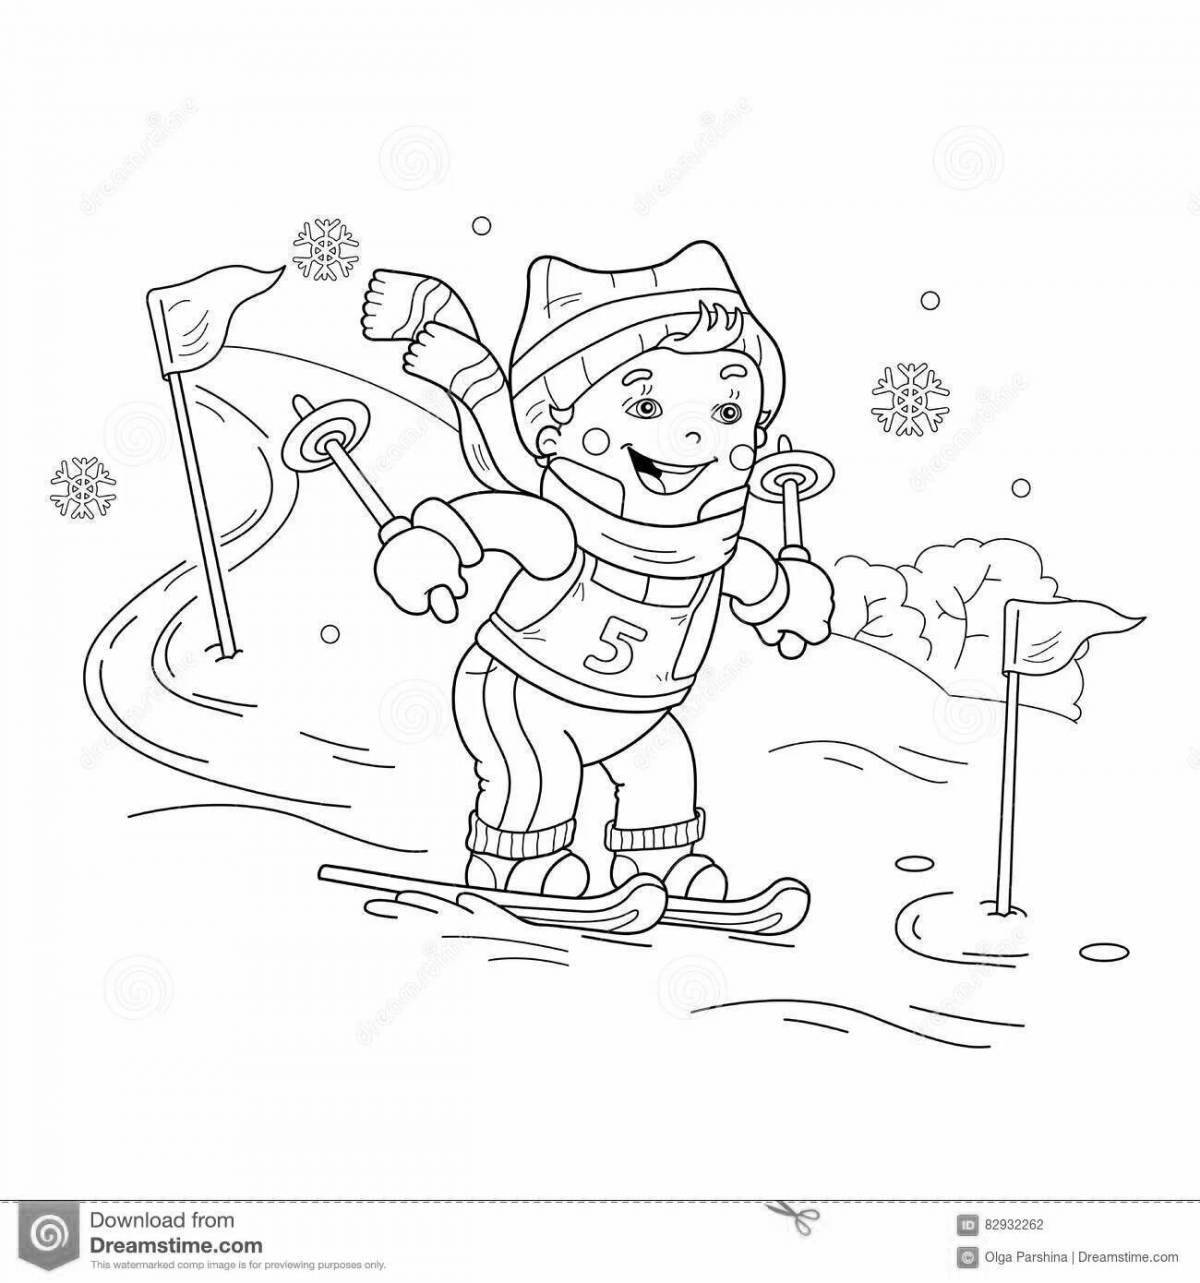 Coloring book cheerful skier for children 6-7 years old